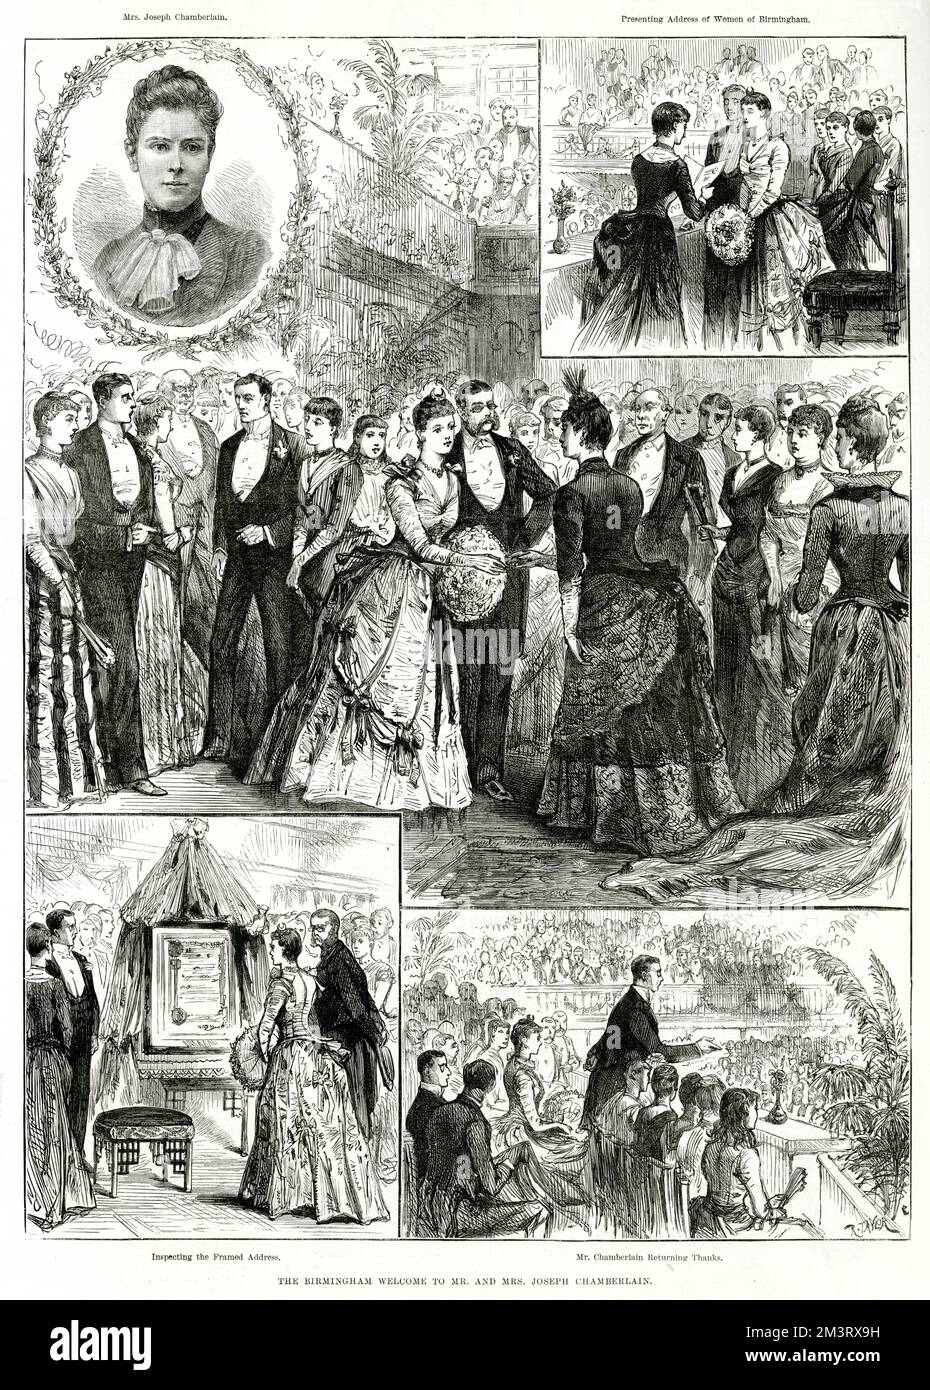 The Birmingham welcome to Mr and Mrs Joseph Chamberlain on the occasion of Chamberlain returning to his home city with his American wife Mary Crowninshield Endicott, after meeting her while leading a delegration to the United States.     Date: 1889 Stock Photo